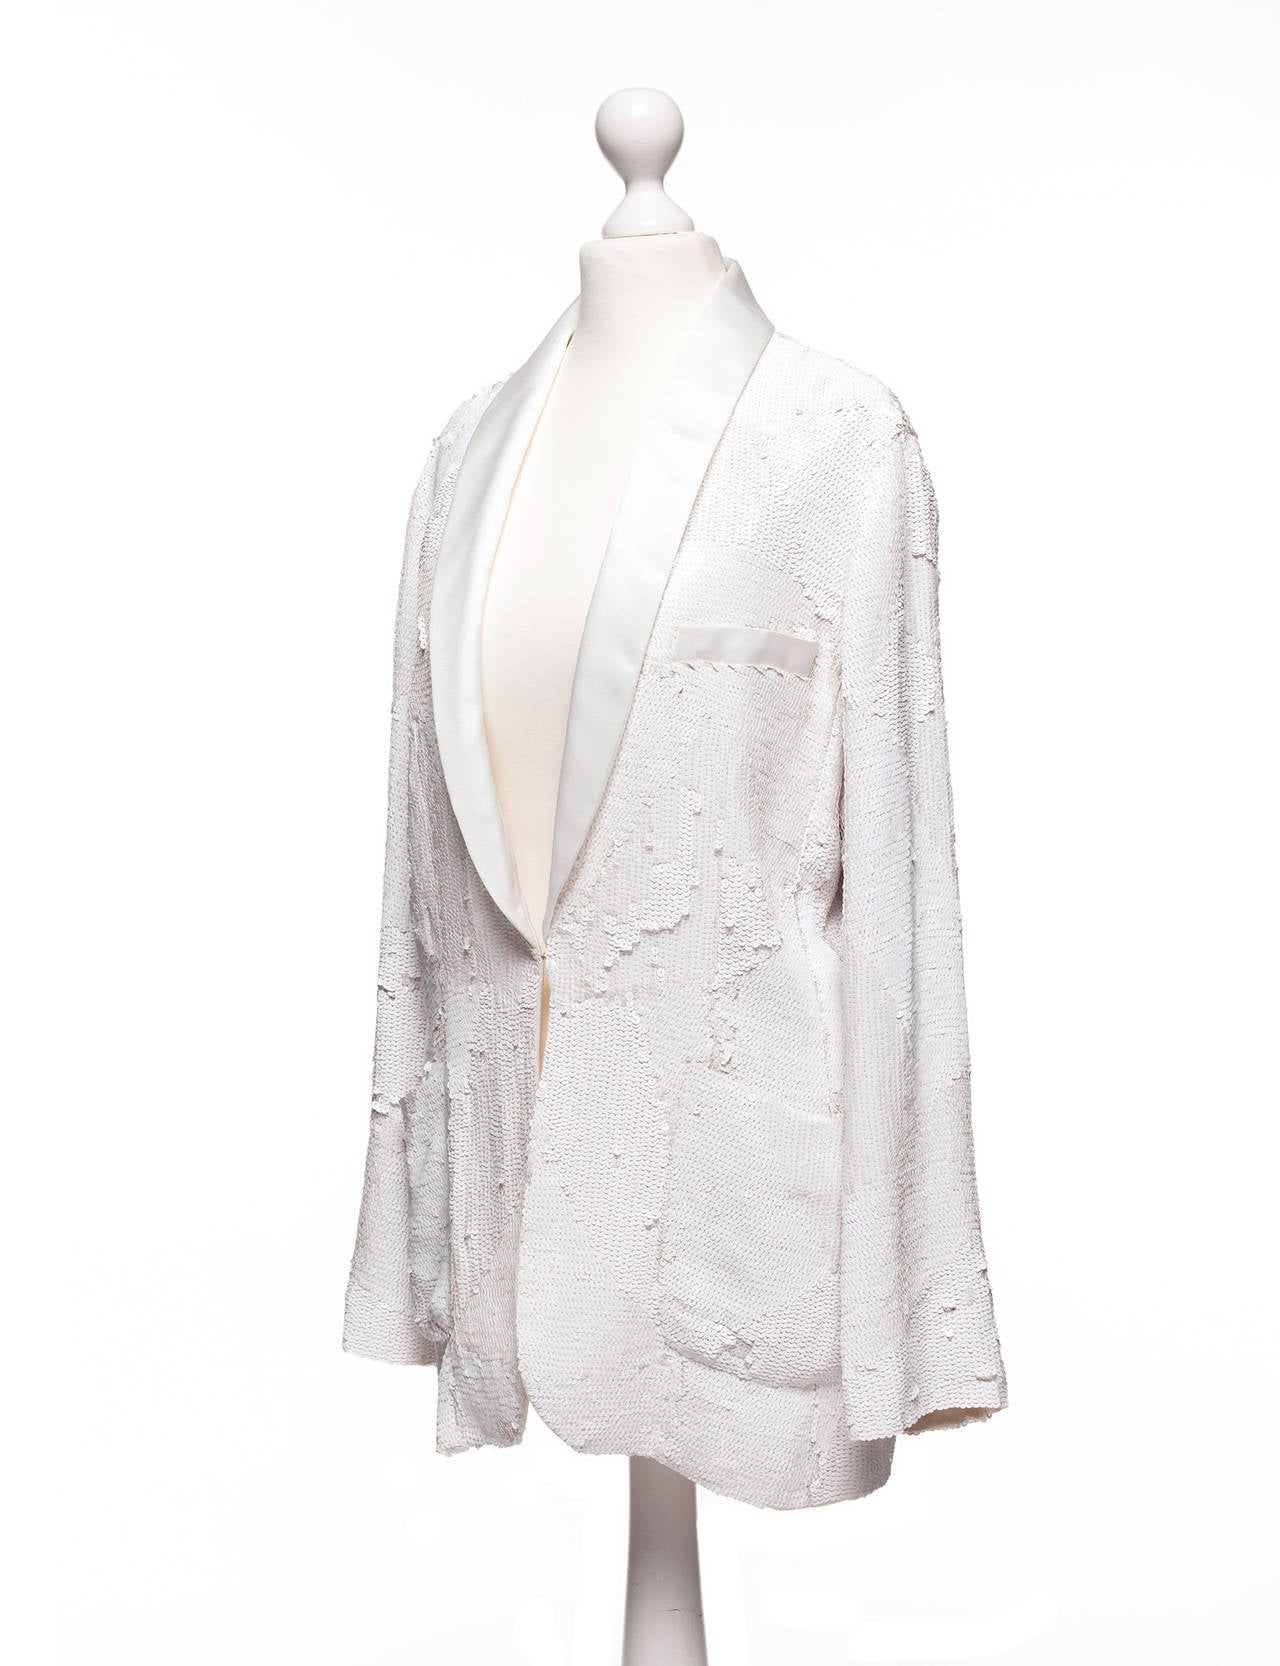 Chloe by Stella McCartney sequin ecru Blazer. Blazer is smoking style with sequin going in different directions to form abstract pattern, satin lapels, soft draping, hook and eye closure. This is a runway sample.